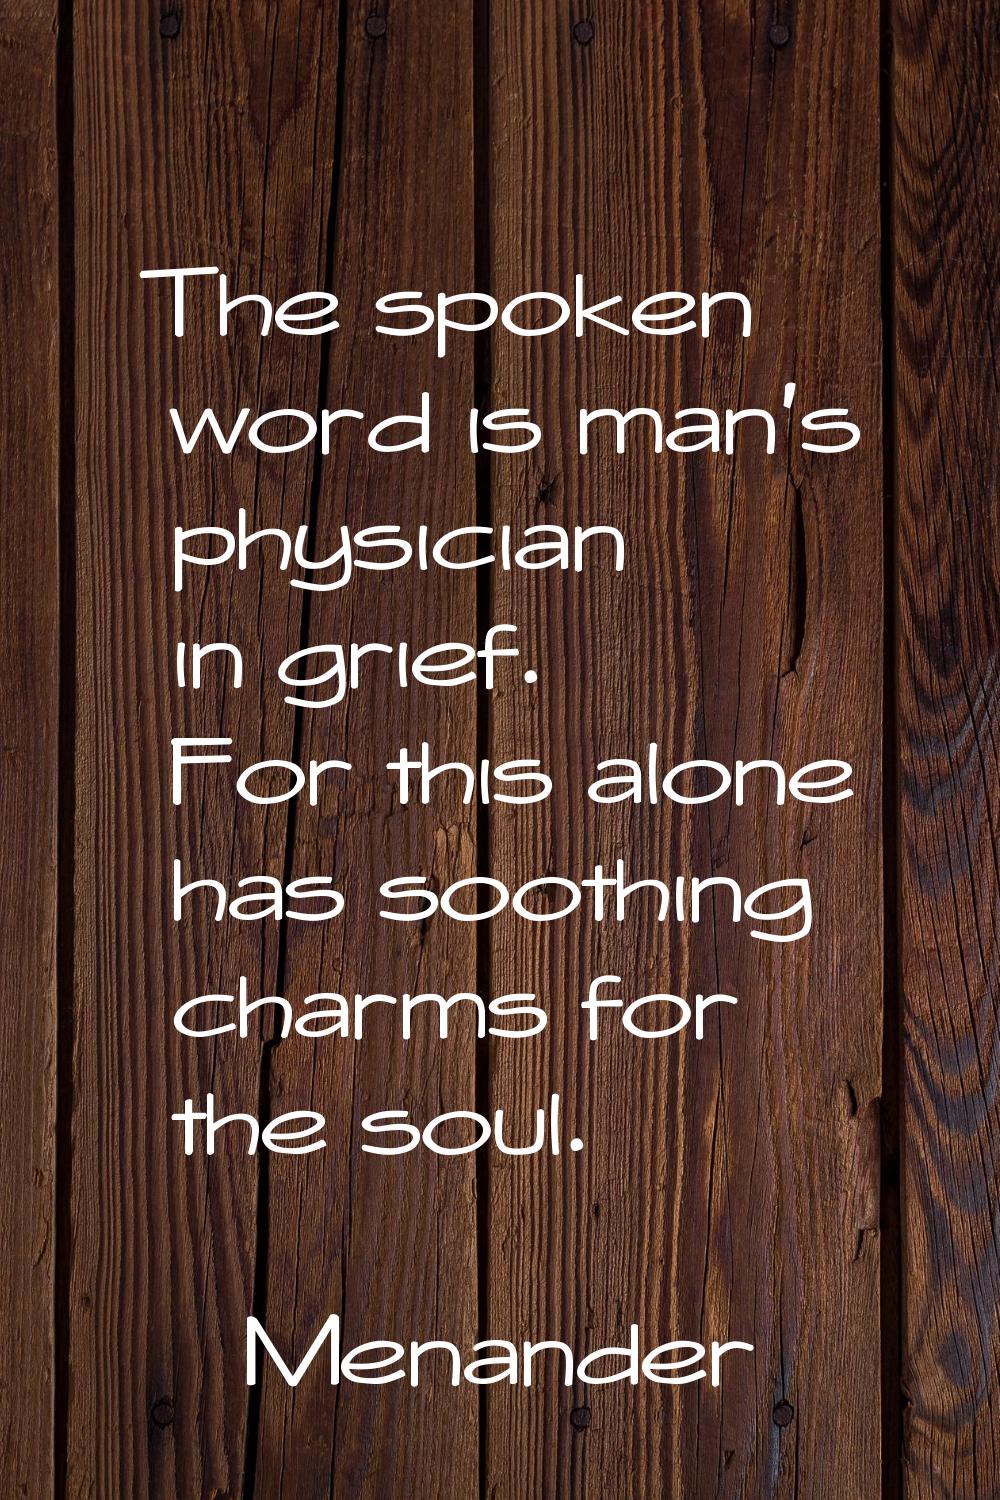 The spoken word is man's physician in grief. For this alone has soothing charms for the soul.